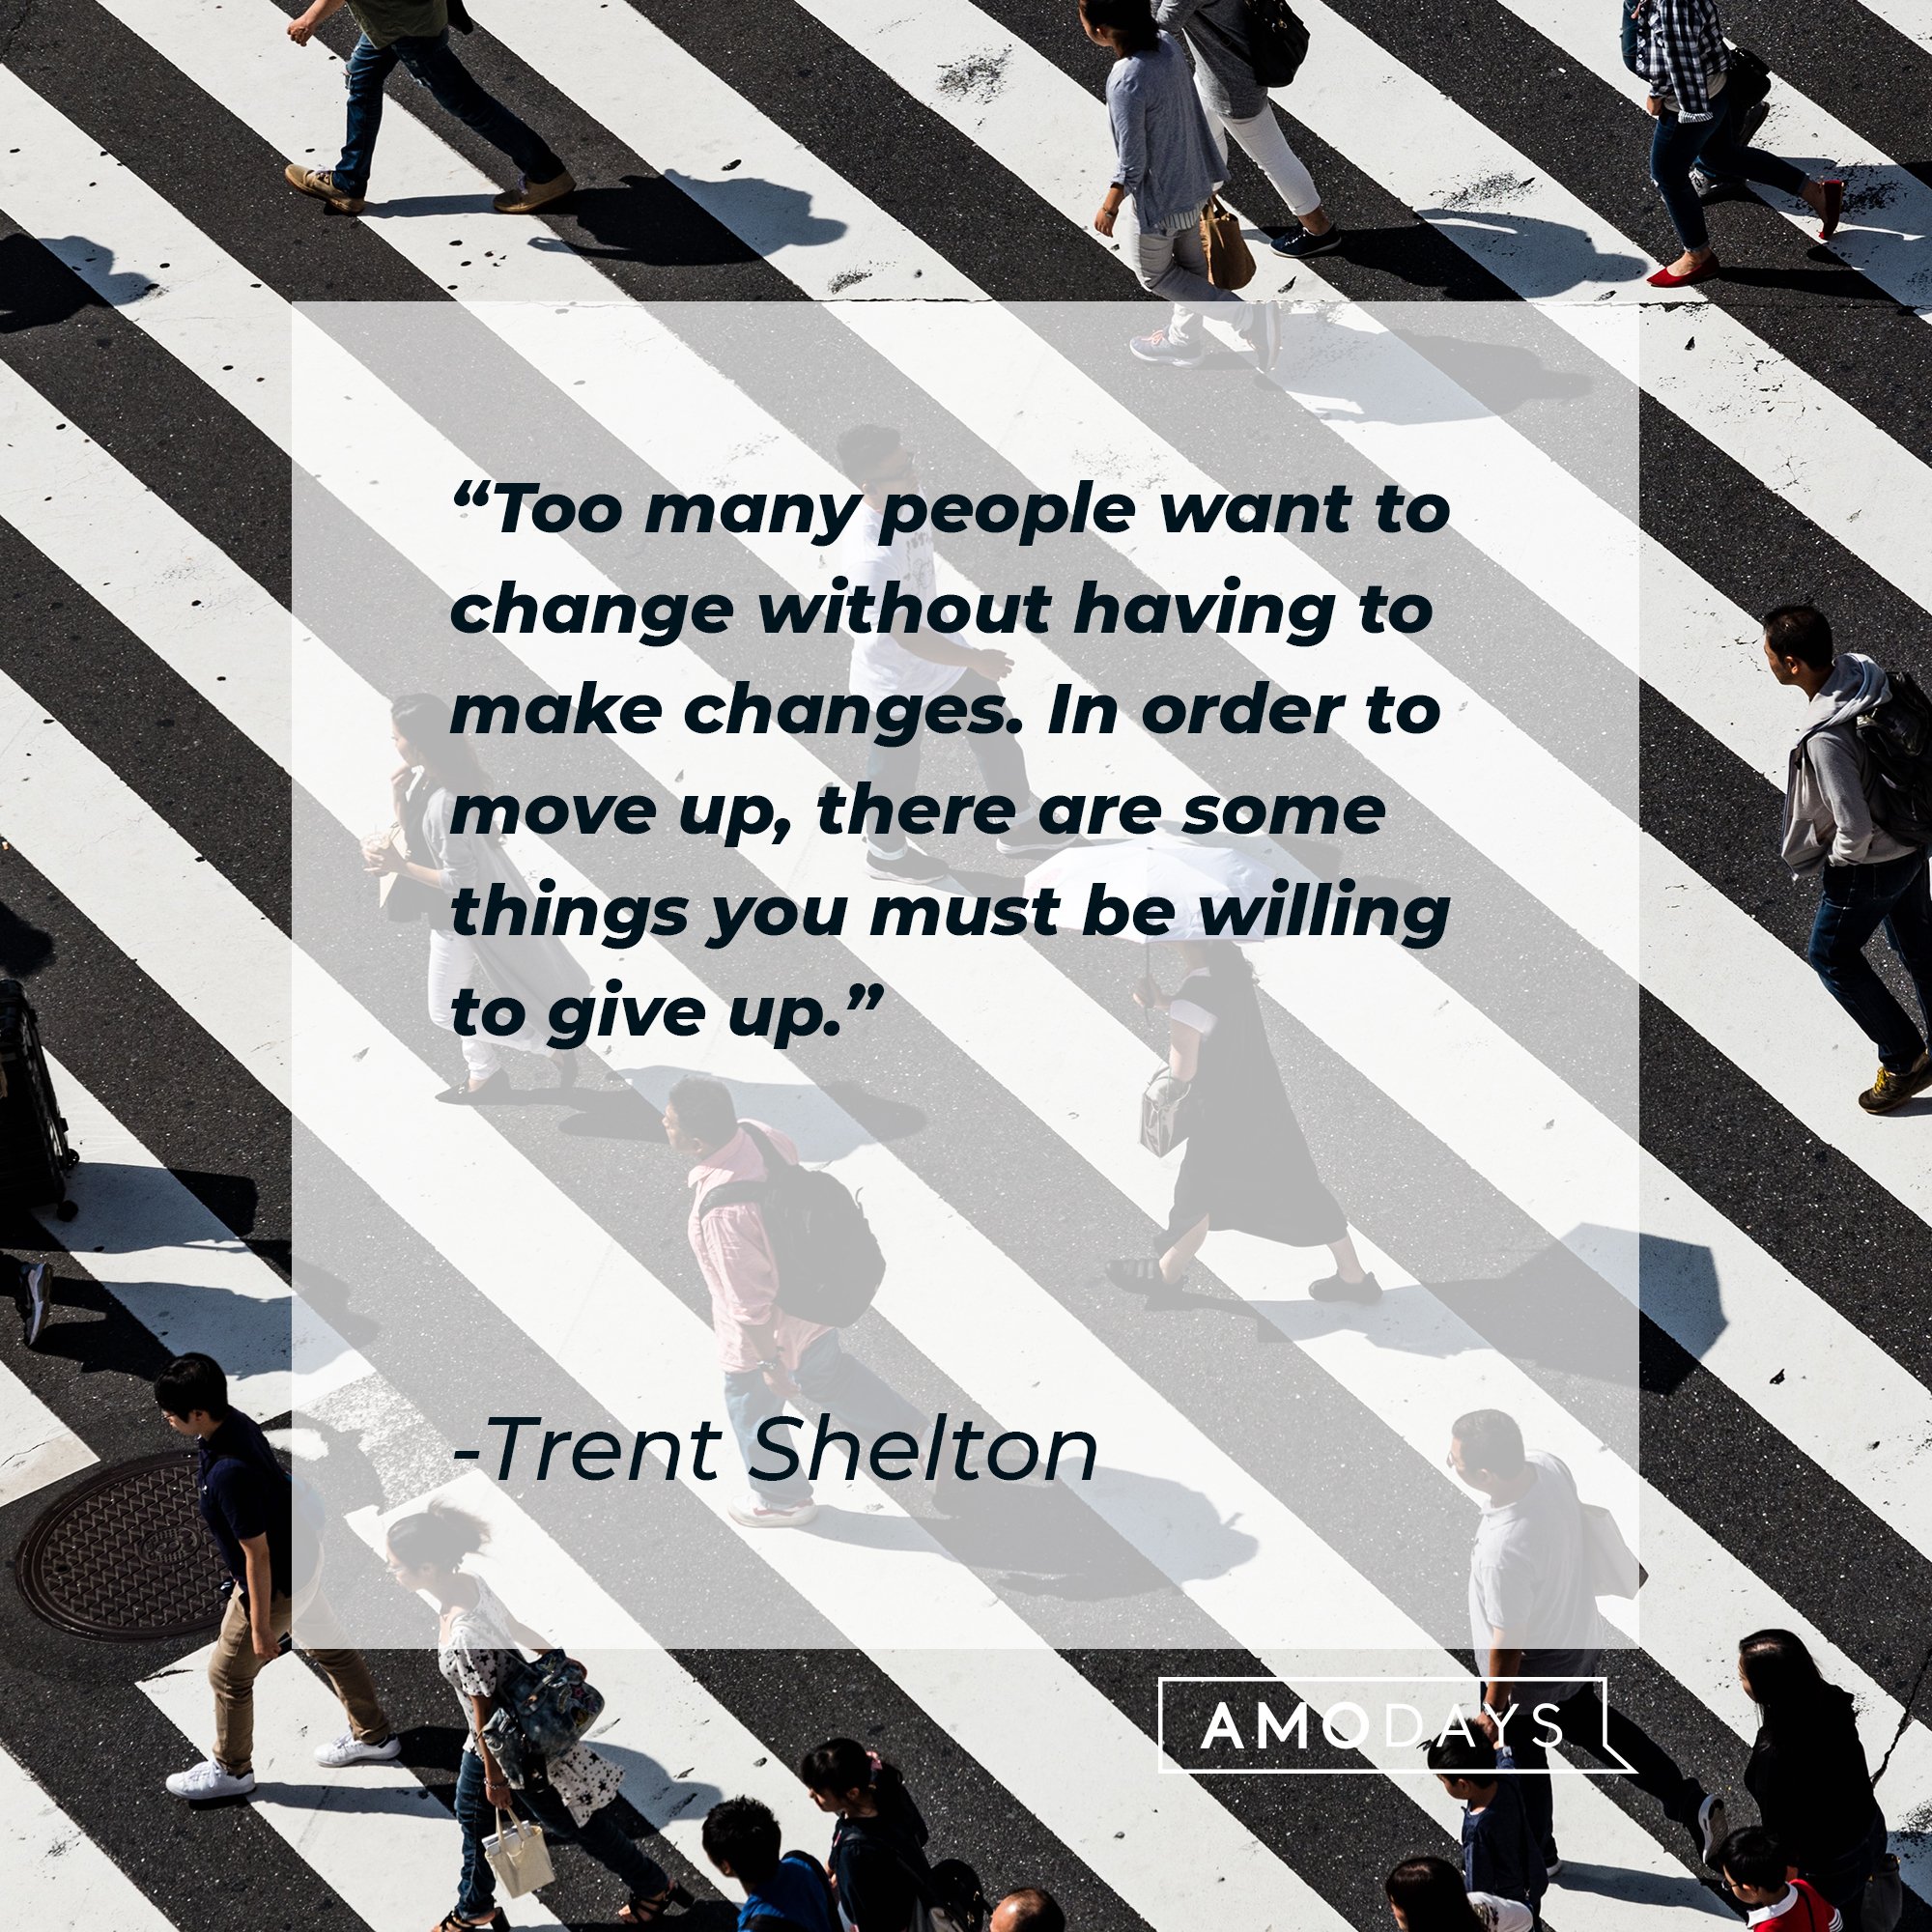 Trent Shelton’s quote: "Too many people want to change without having to make changes. In order to move up, there are some things you must be willing to give up."  | Image: AmoDays